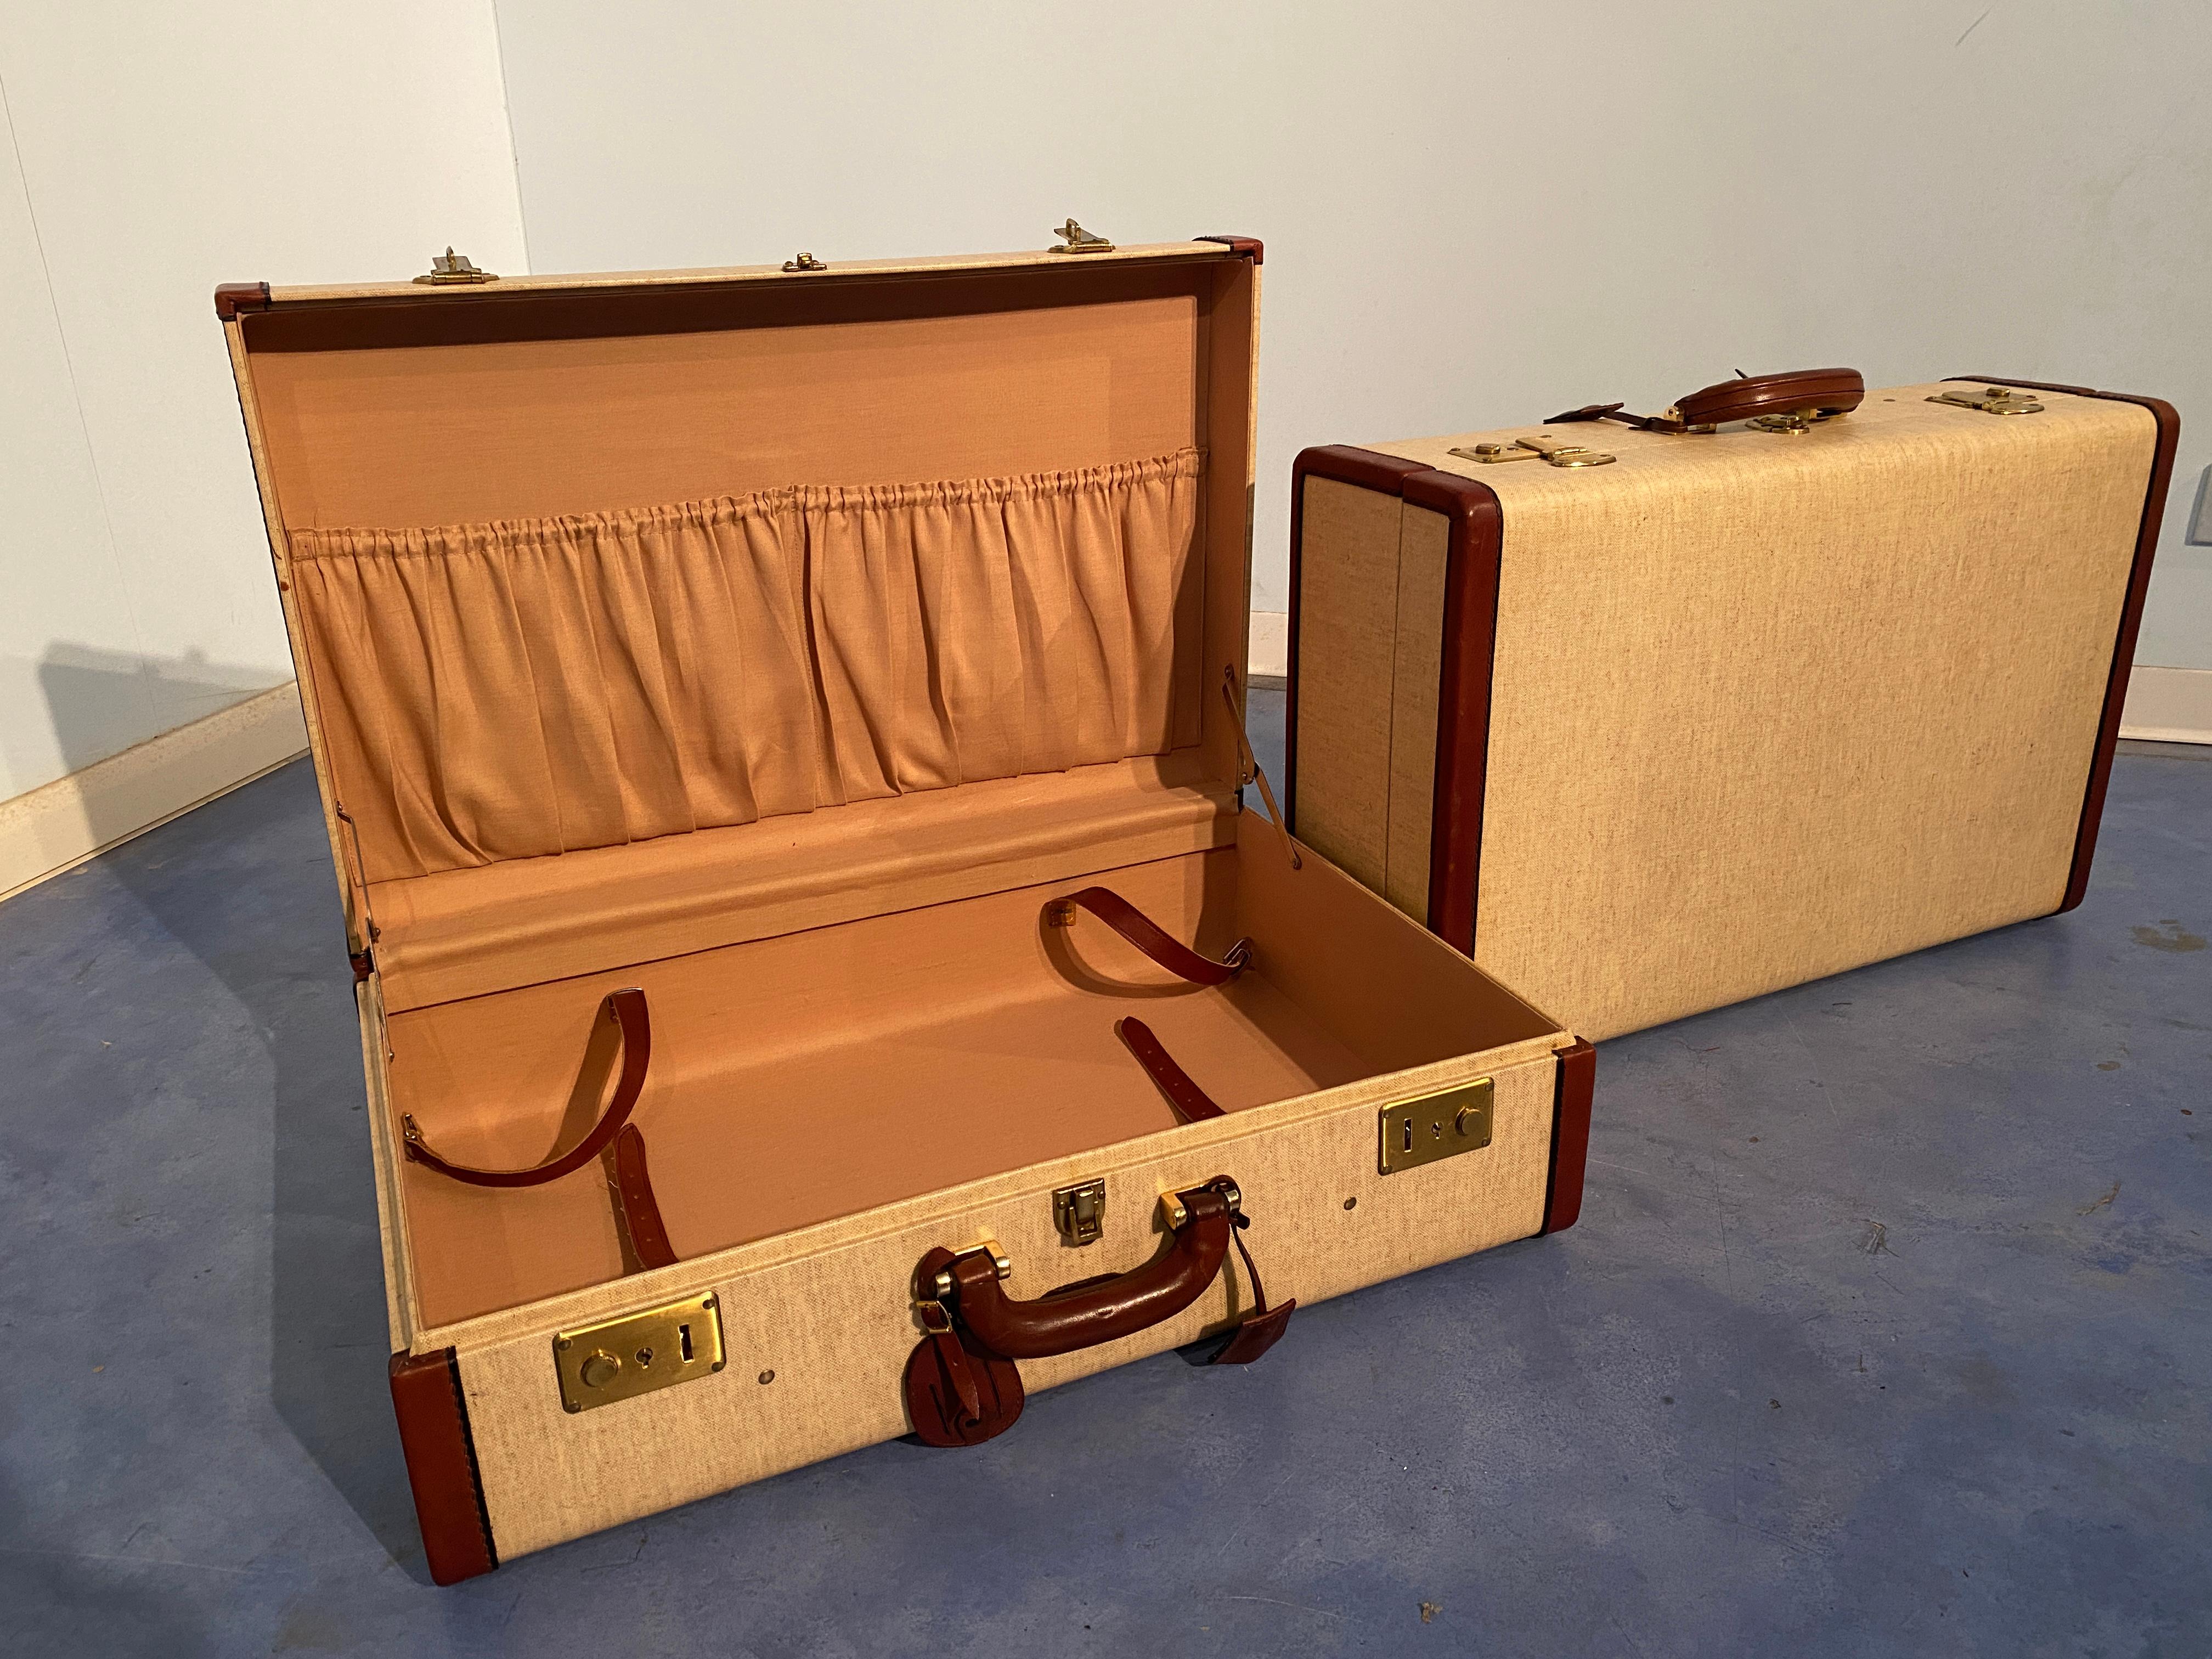 Italian Mid-Century Moder Luggages or Suitcases Mèlange Color, Set of Two, 1960 For Sale 7